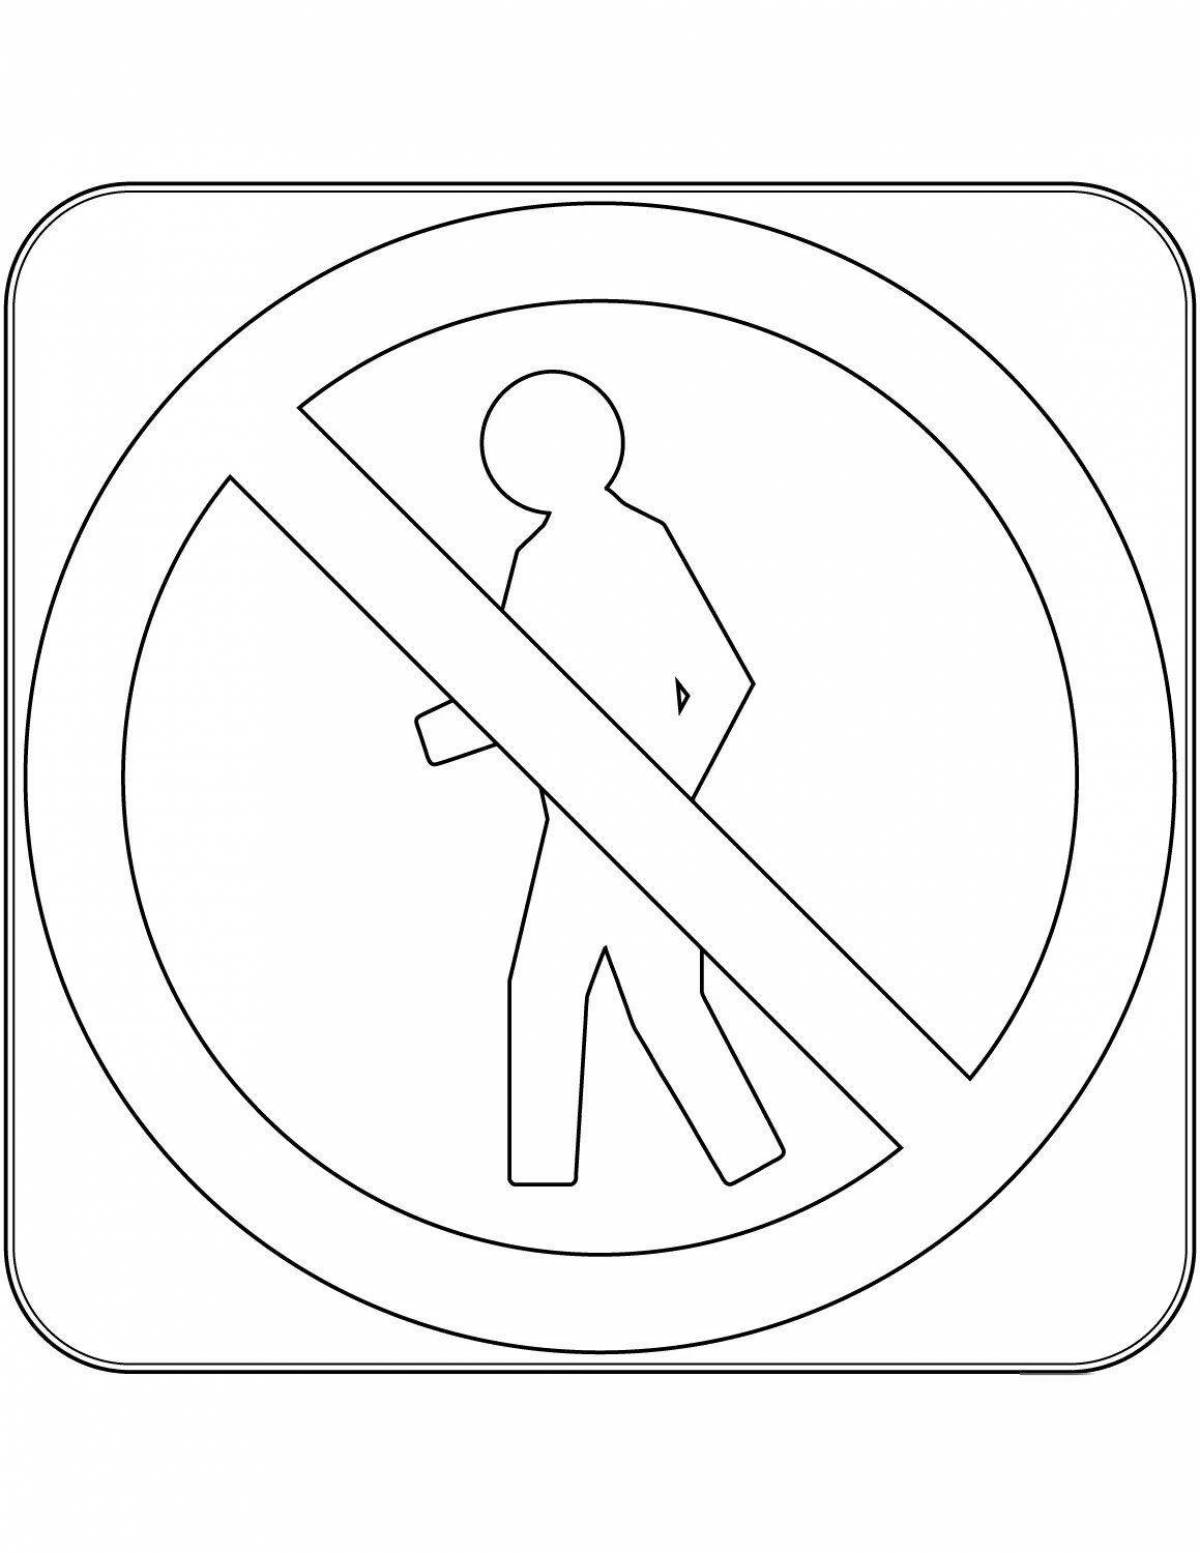 Amazing coloring page of no traffic signs